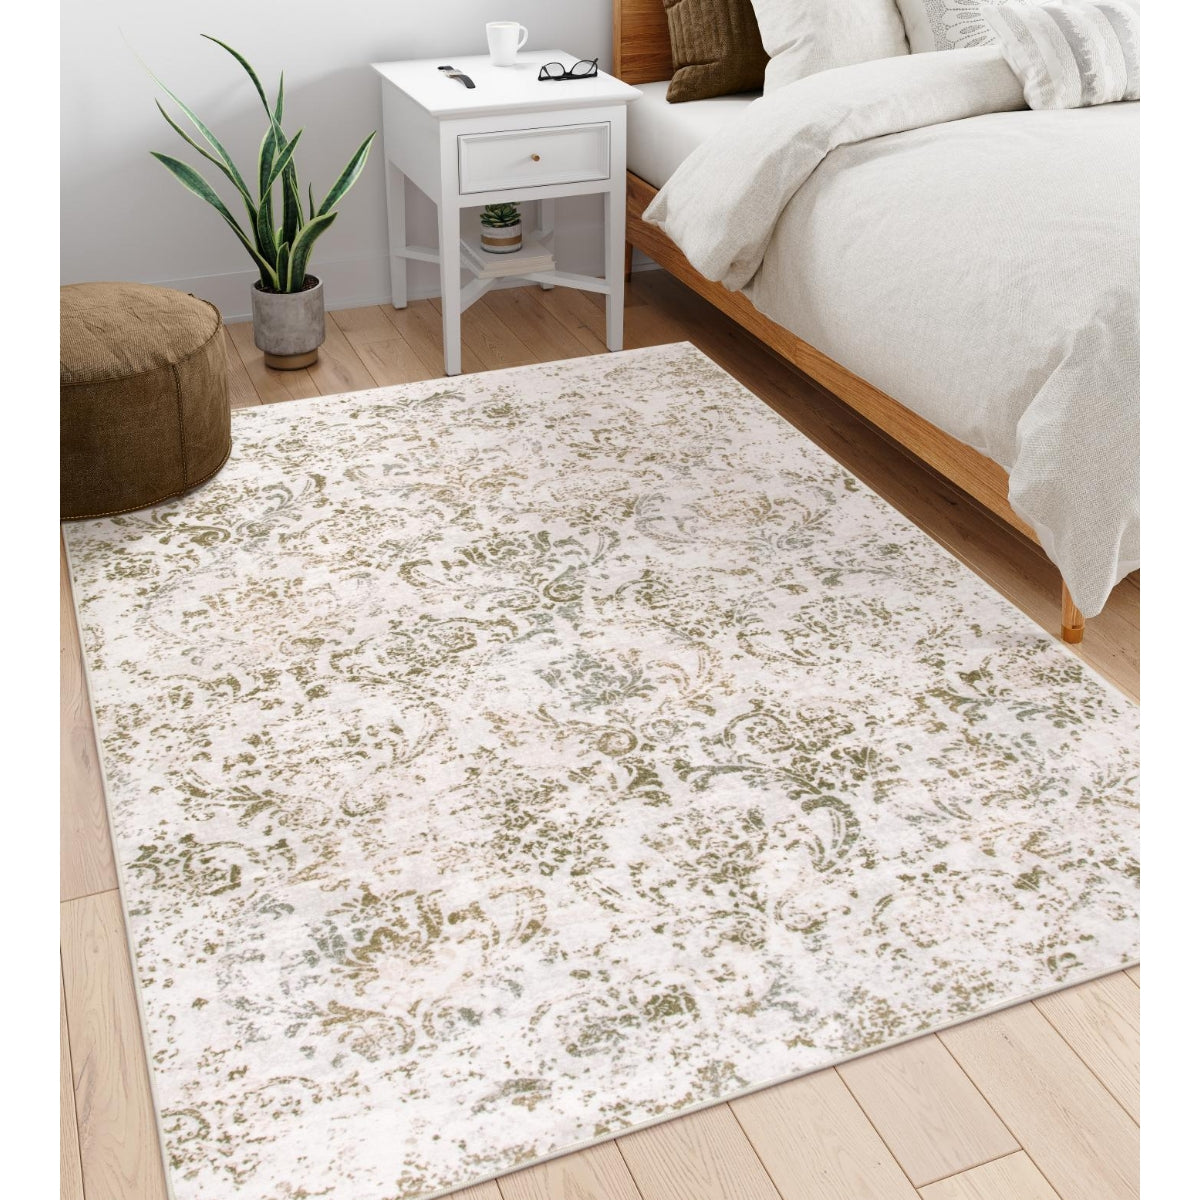 Esme Transitional Paisley Palace Floral Beige Area Rug